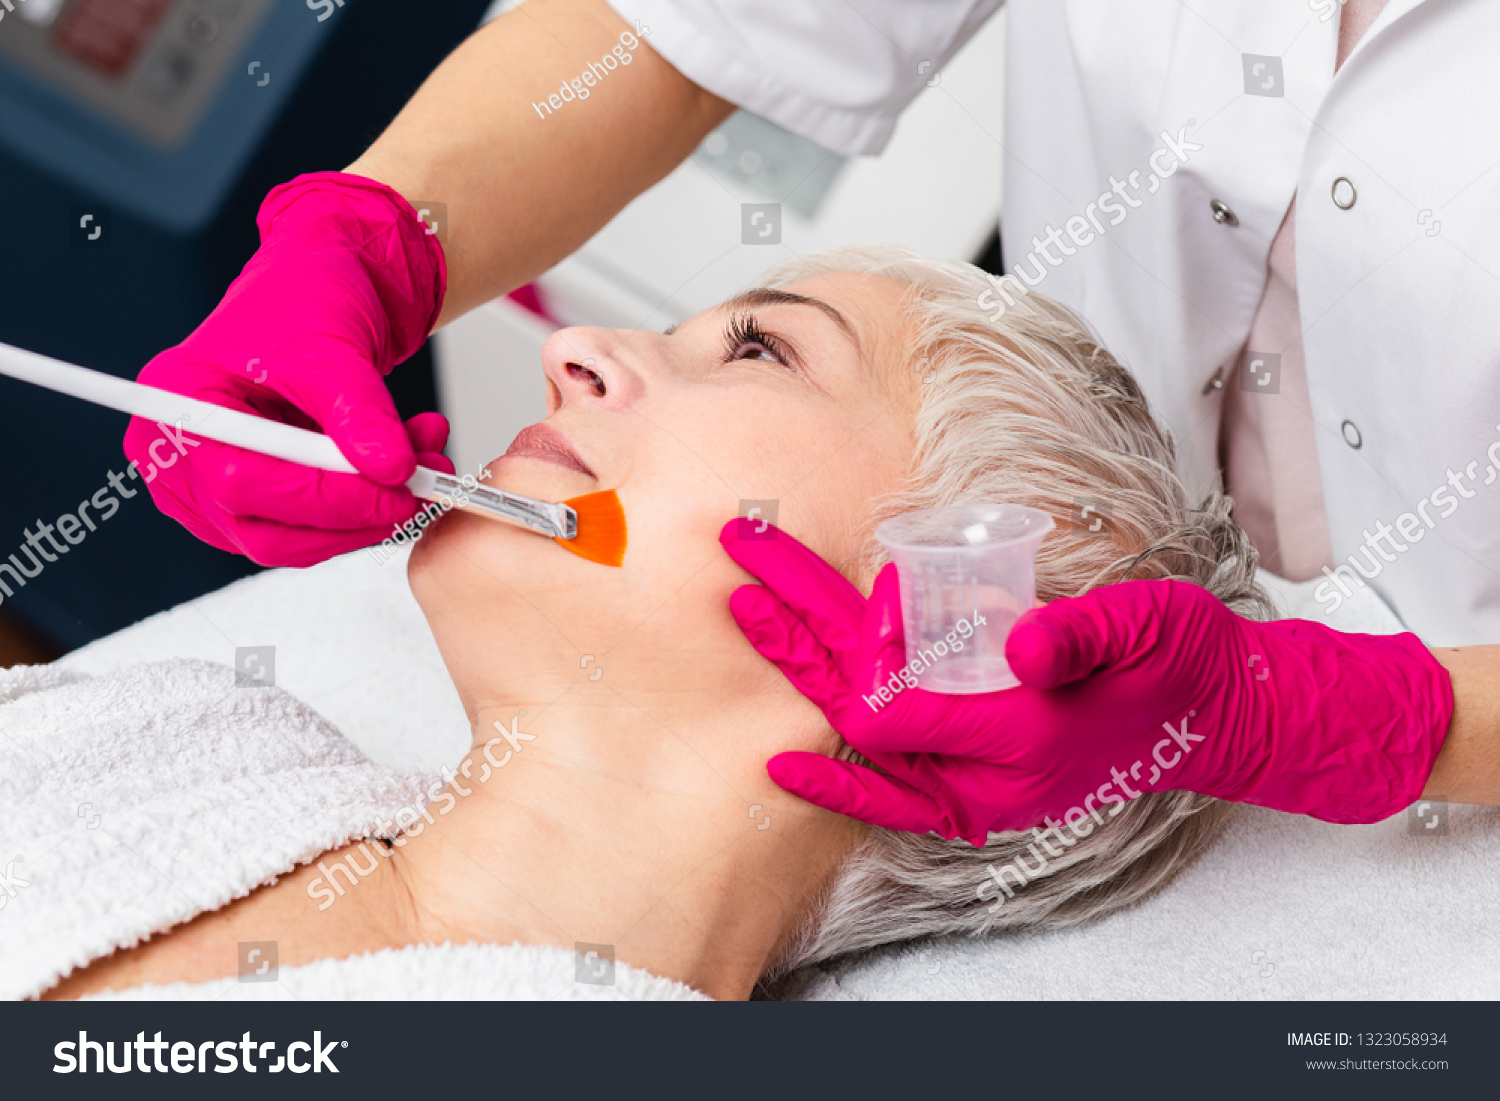 Beautiful senior woman having chemical peeling beauty treatment. The expert beautician is applying chemical solution onto woman's face. #1323058934